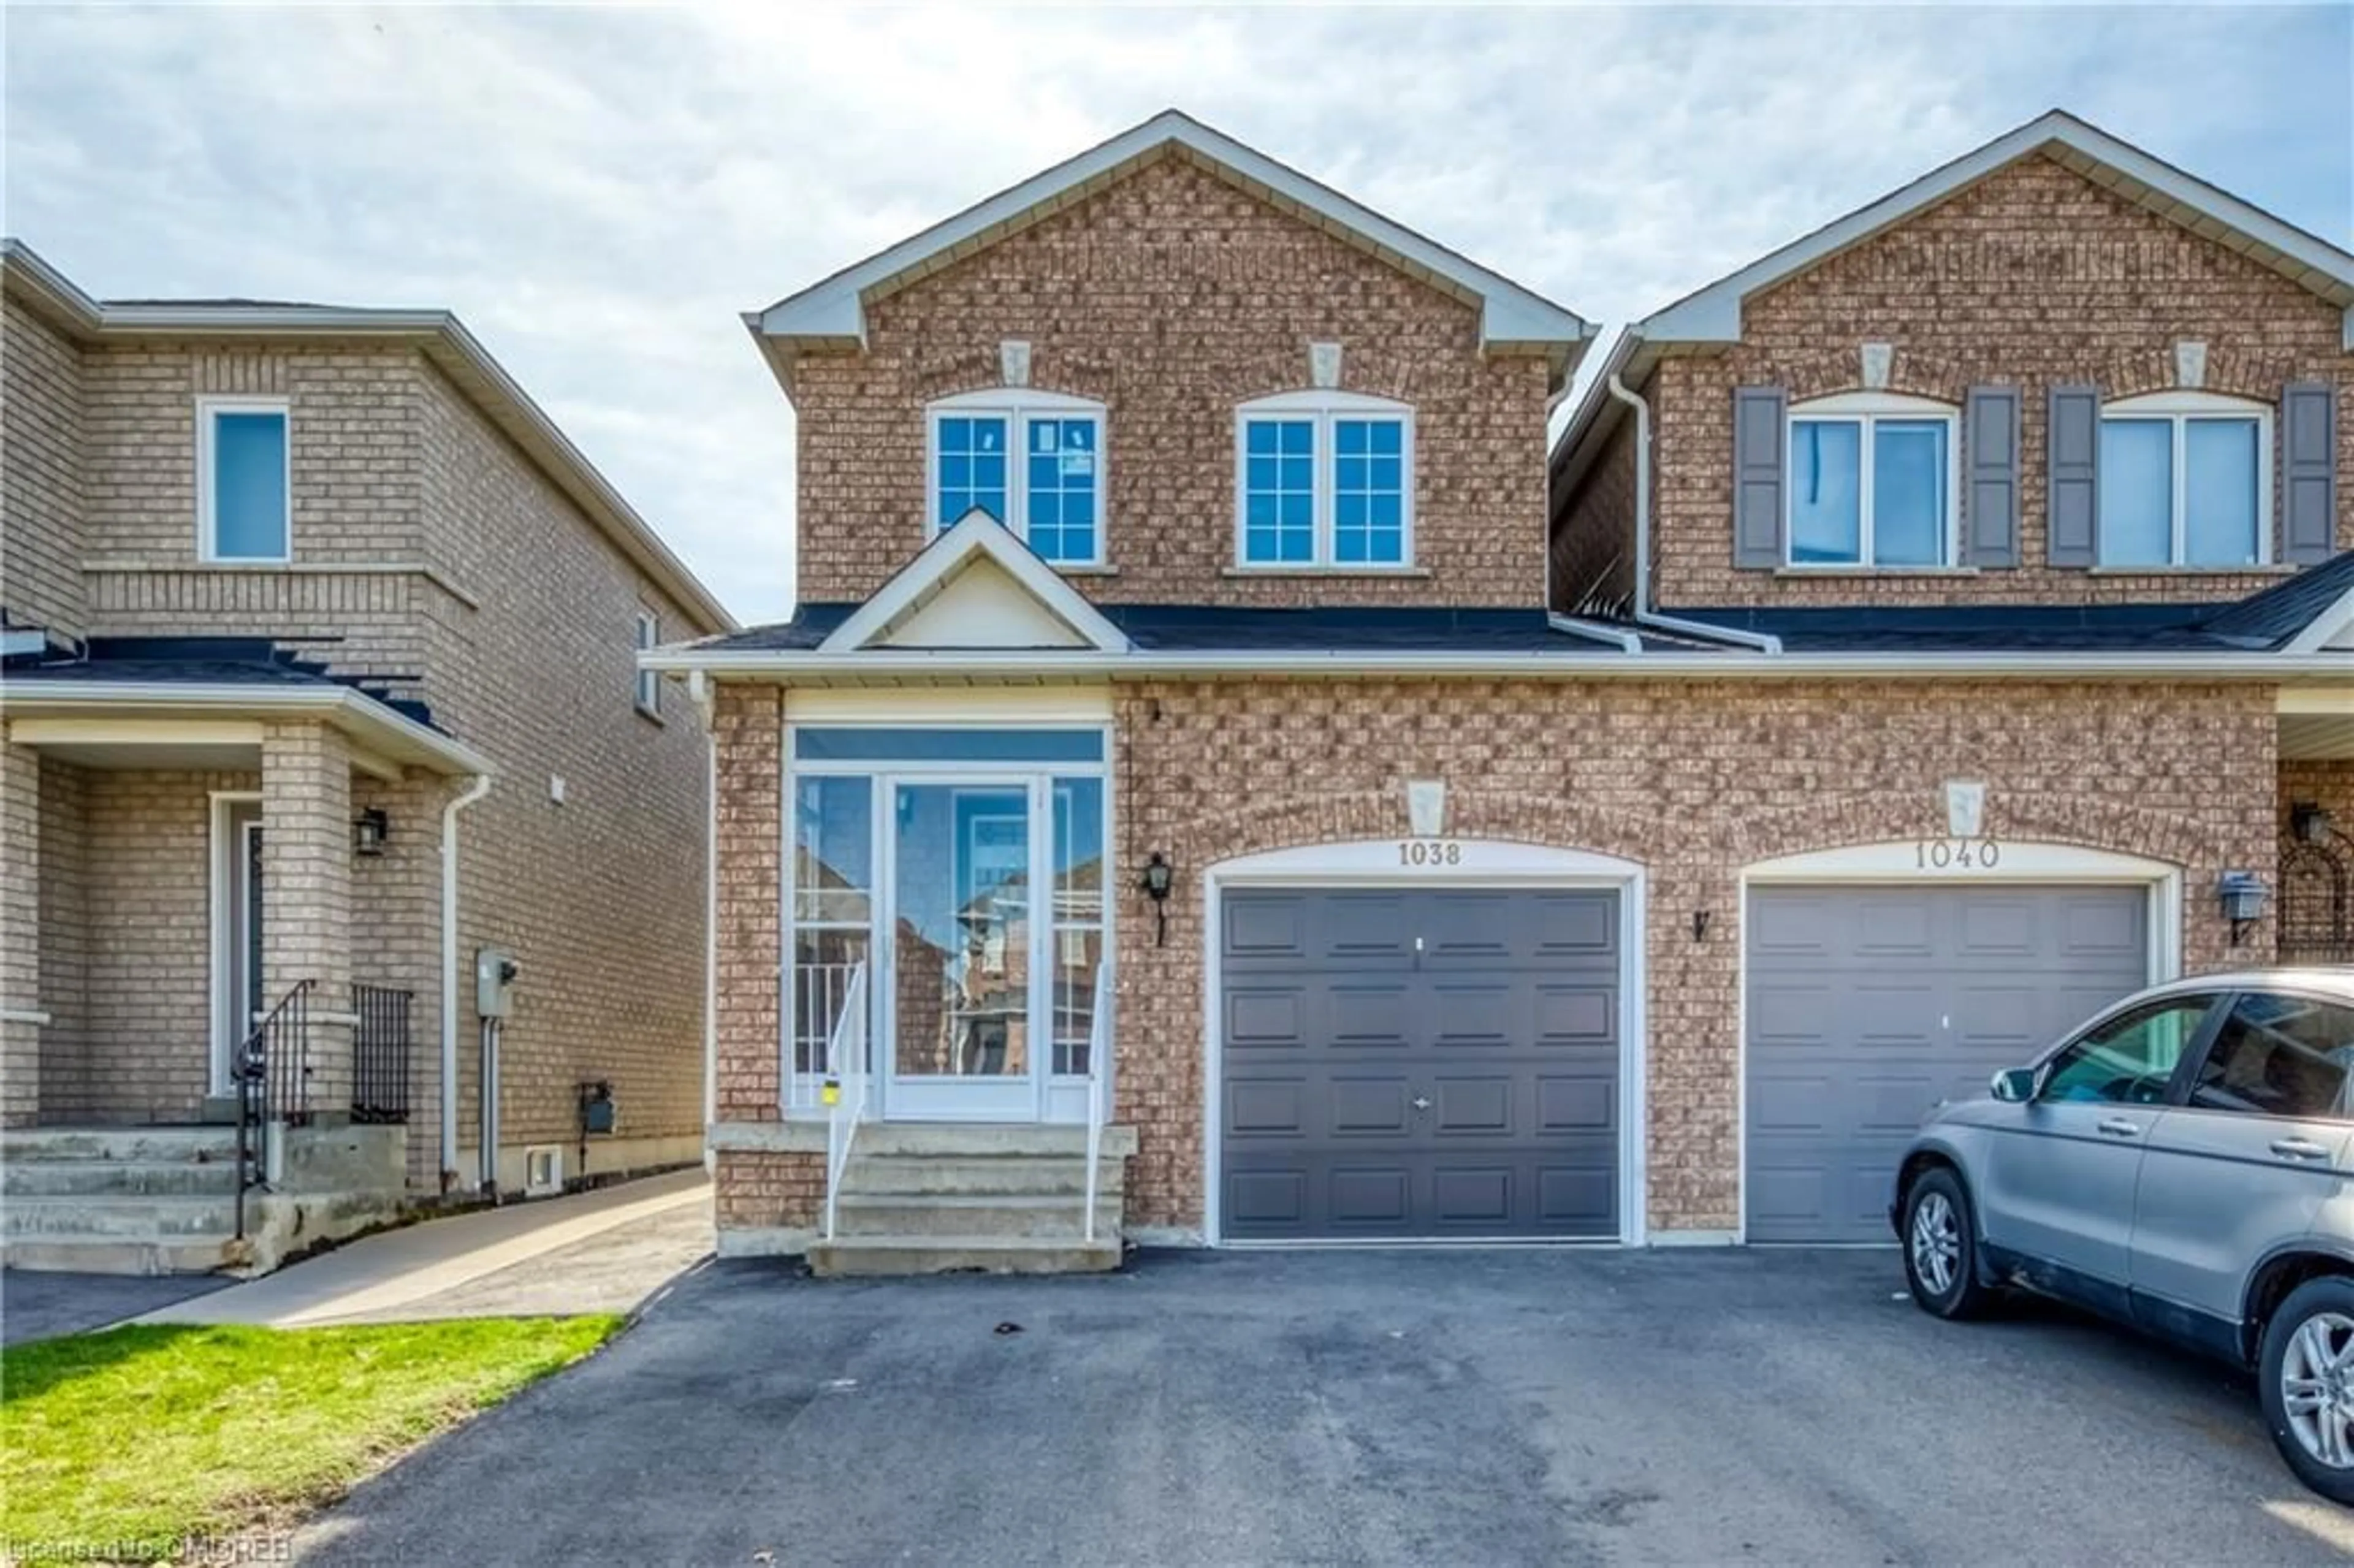 Home with brick exterior material for 1038 Windbrook Grove, Mississauga Ontario L5V 2N7